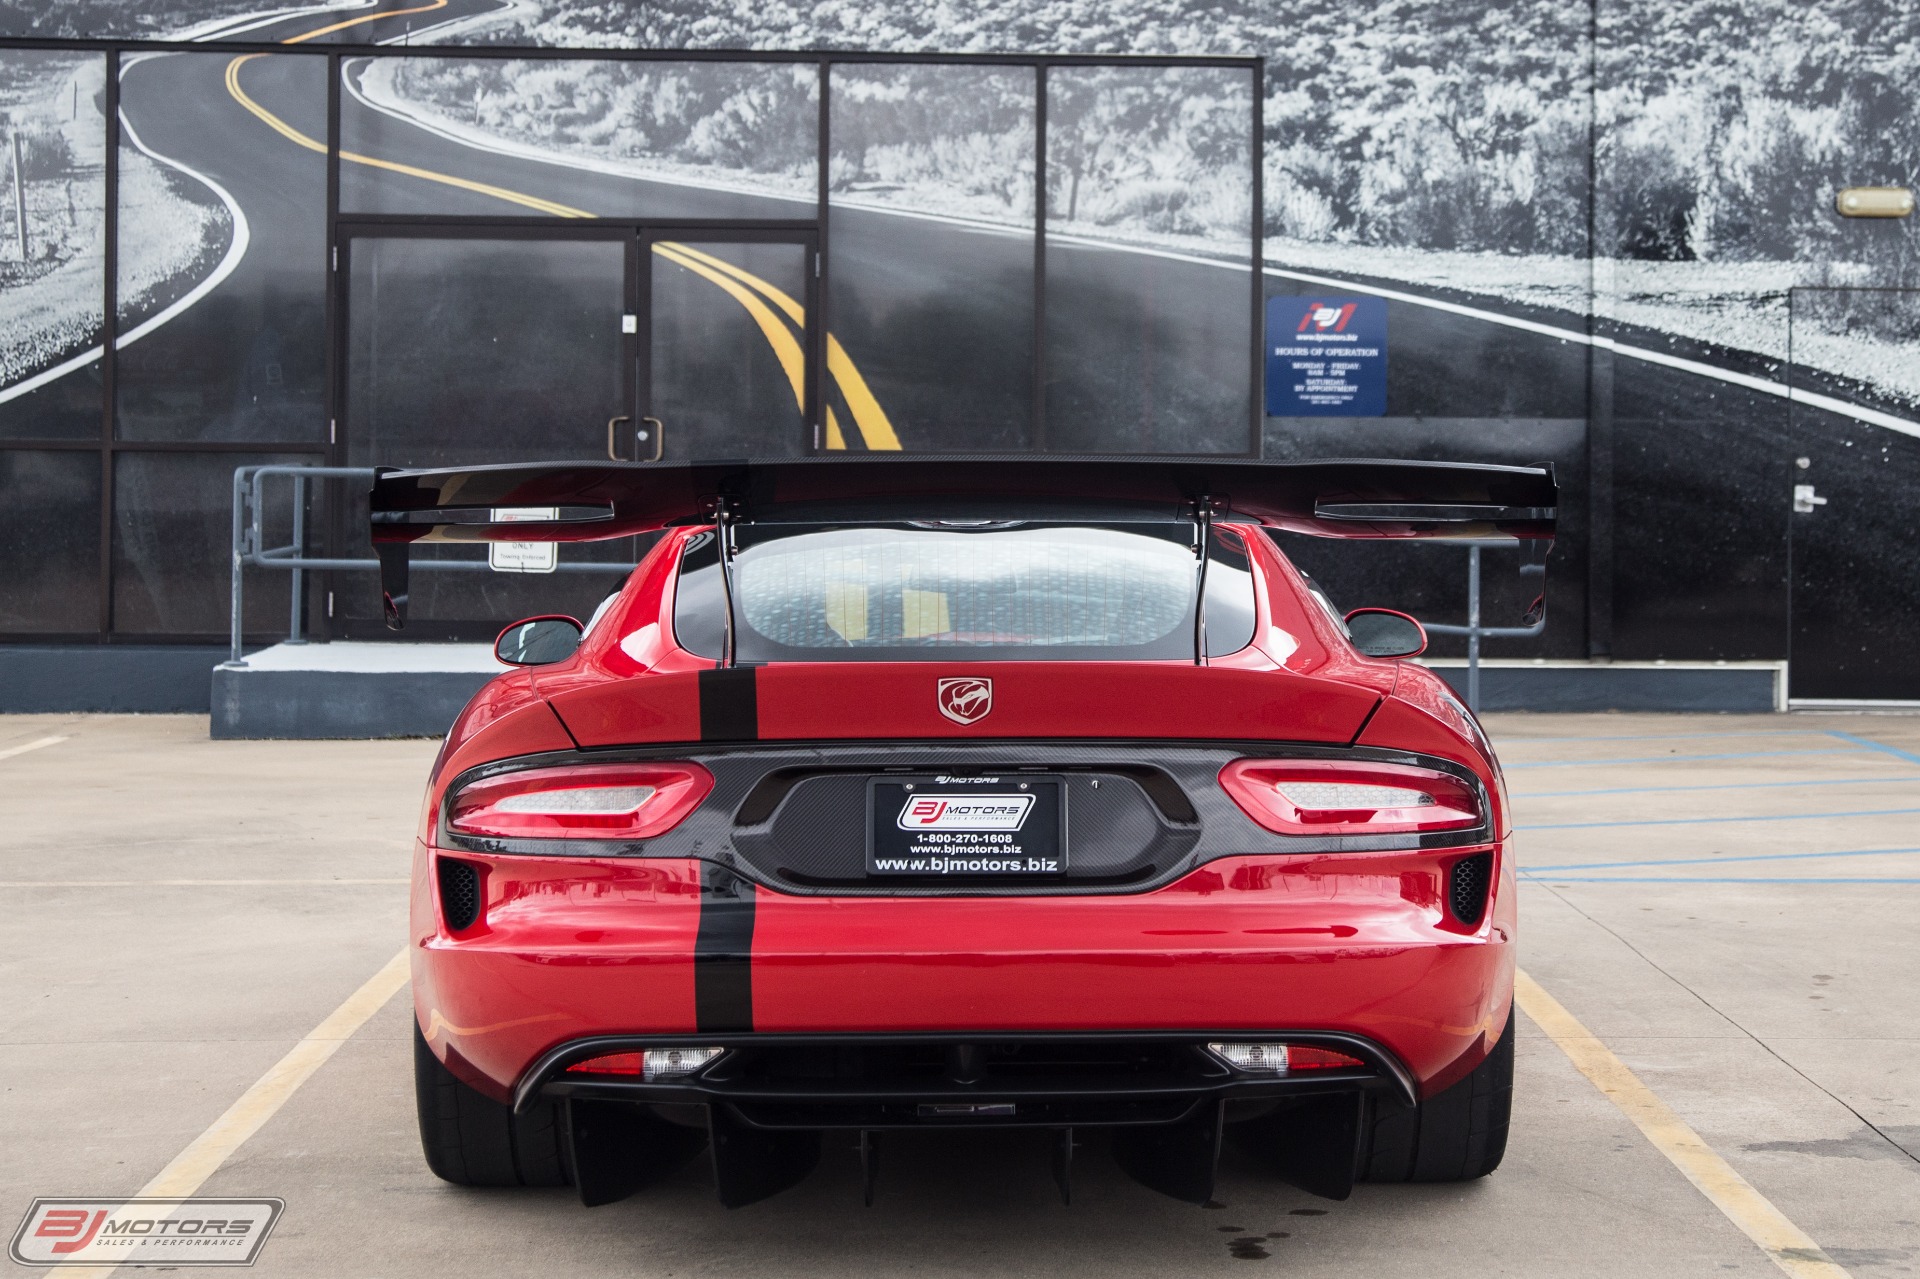 Used-2017-Dodge-Viper-ACR-Extreme